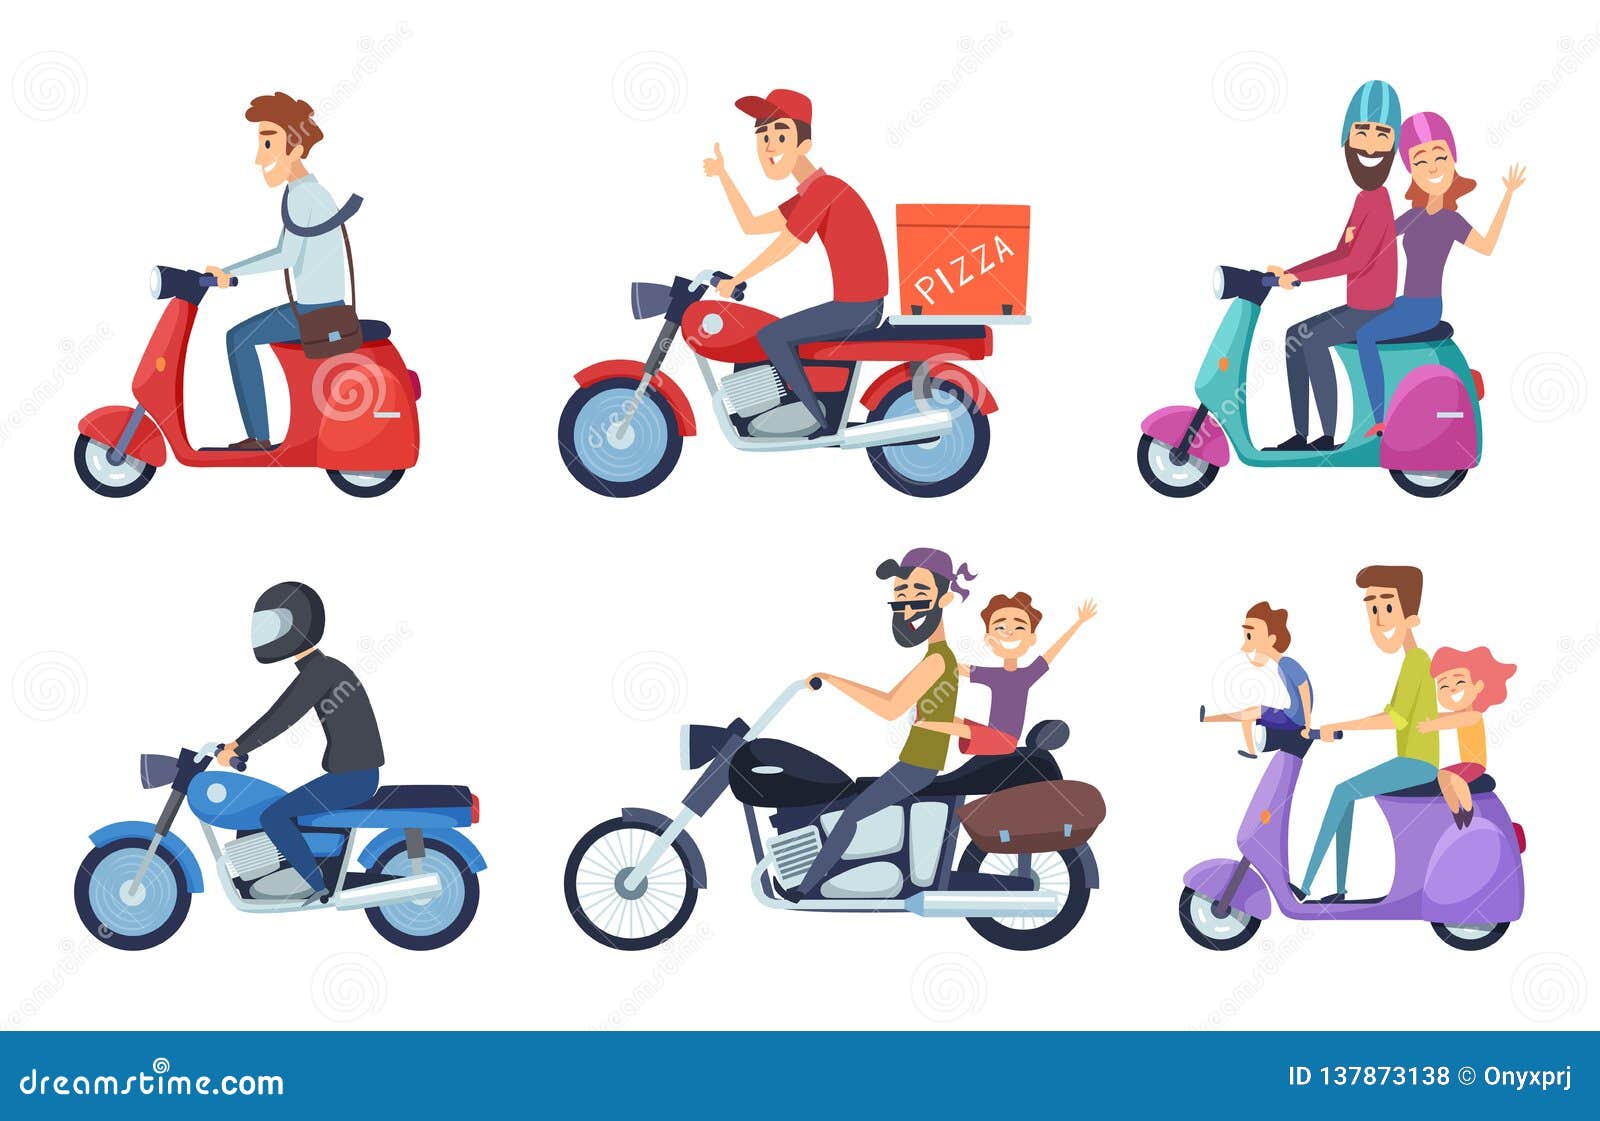 Motorcycle Driving. Man Rides with Woman and Kids Postal Food Pizza Deliver  Vector Characters Cartoon Stock Vector - Illustration of design, bike:  137873138